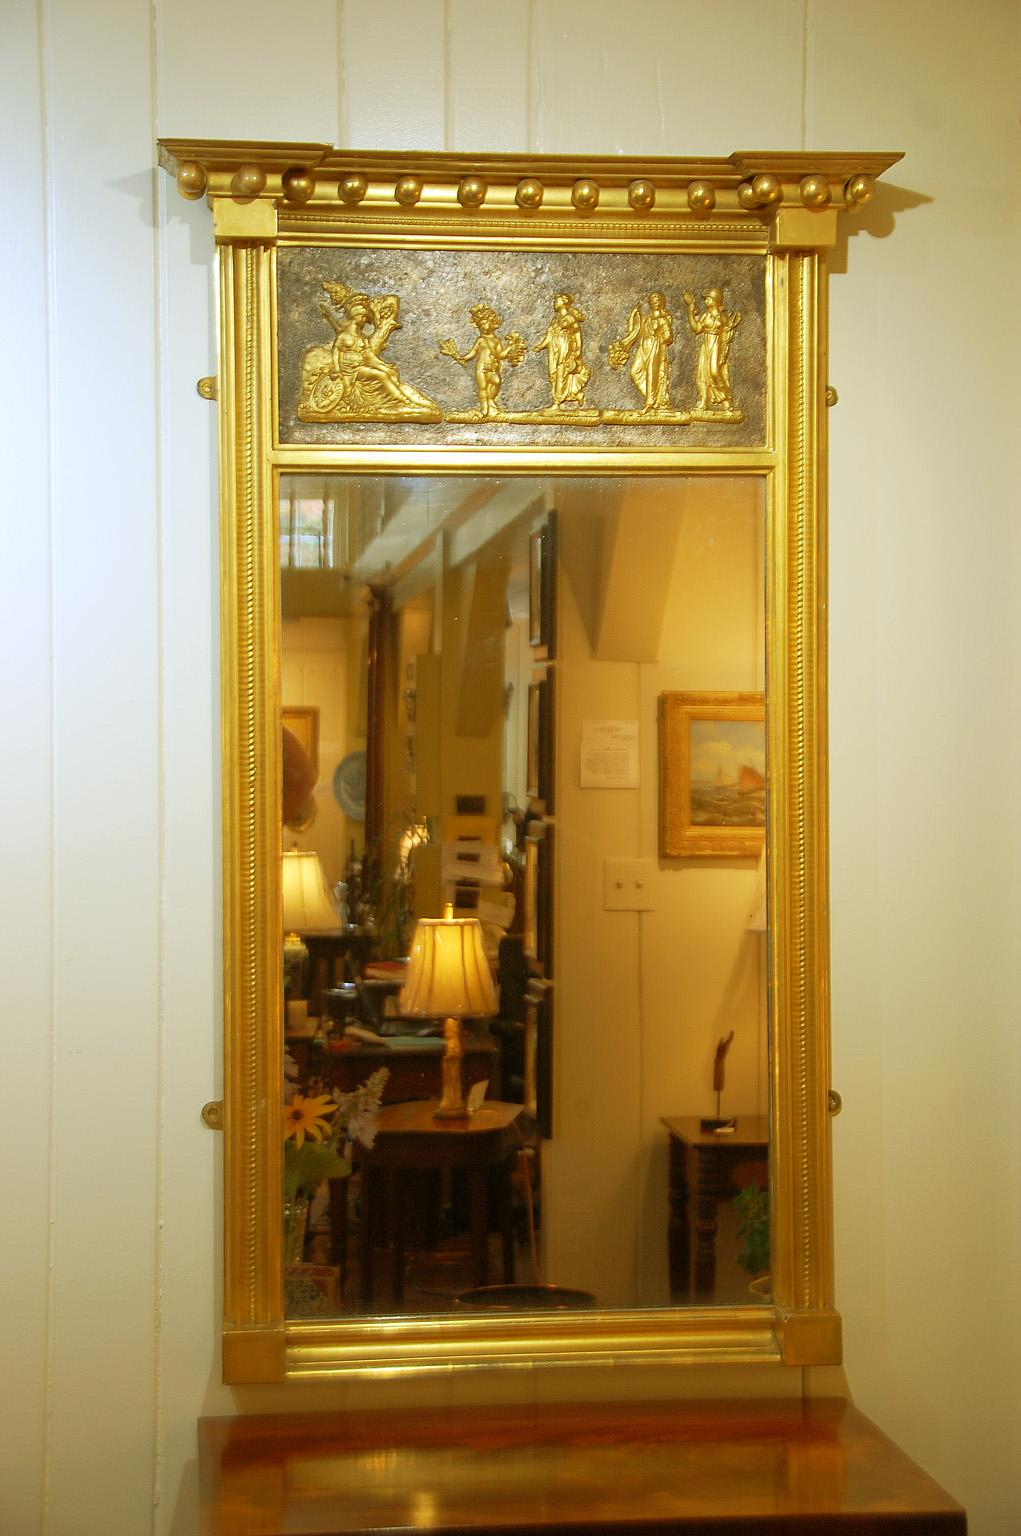 American Federal 18th century gold leaf mirror with bold cornice from which are suspended gold leafed balls. The cornice helps to frame a handsome bas relief panel with classical scene of Athena in her chariot and four approaching figures on a dark